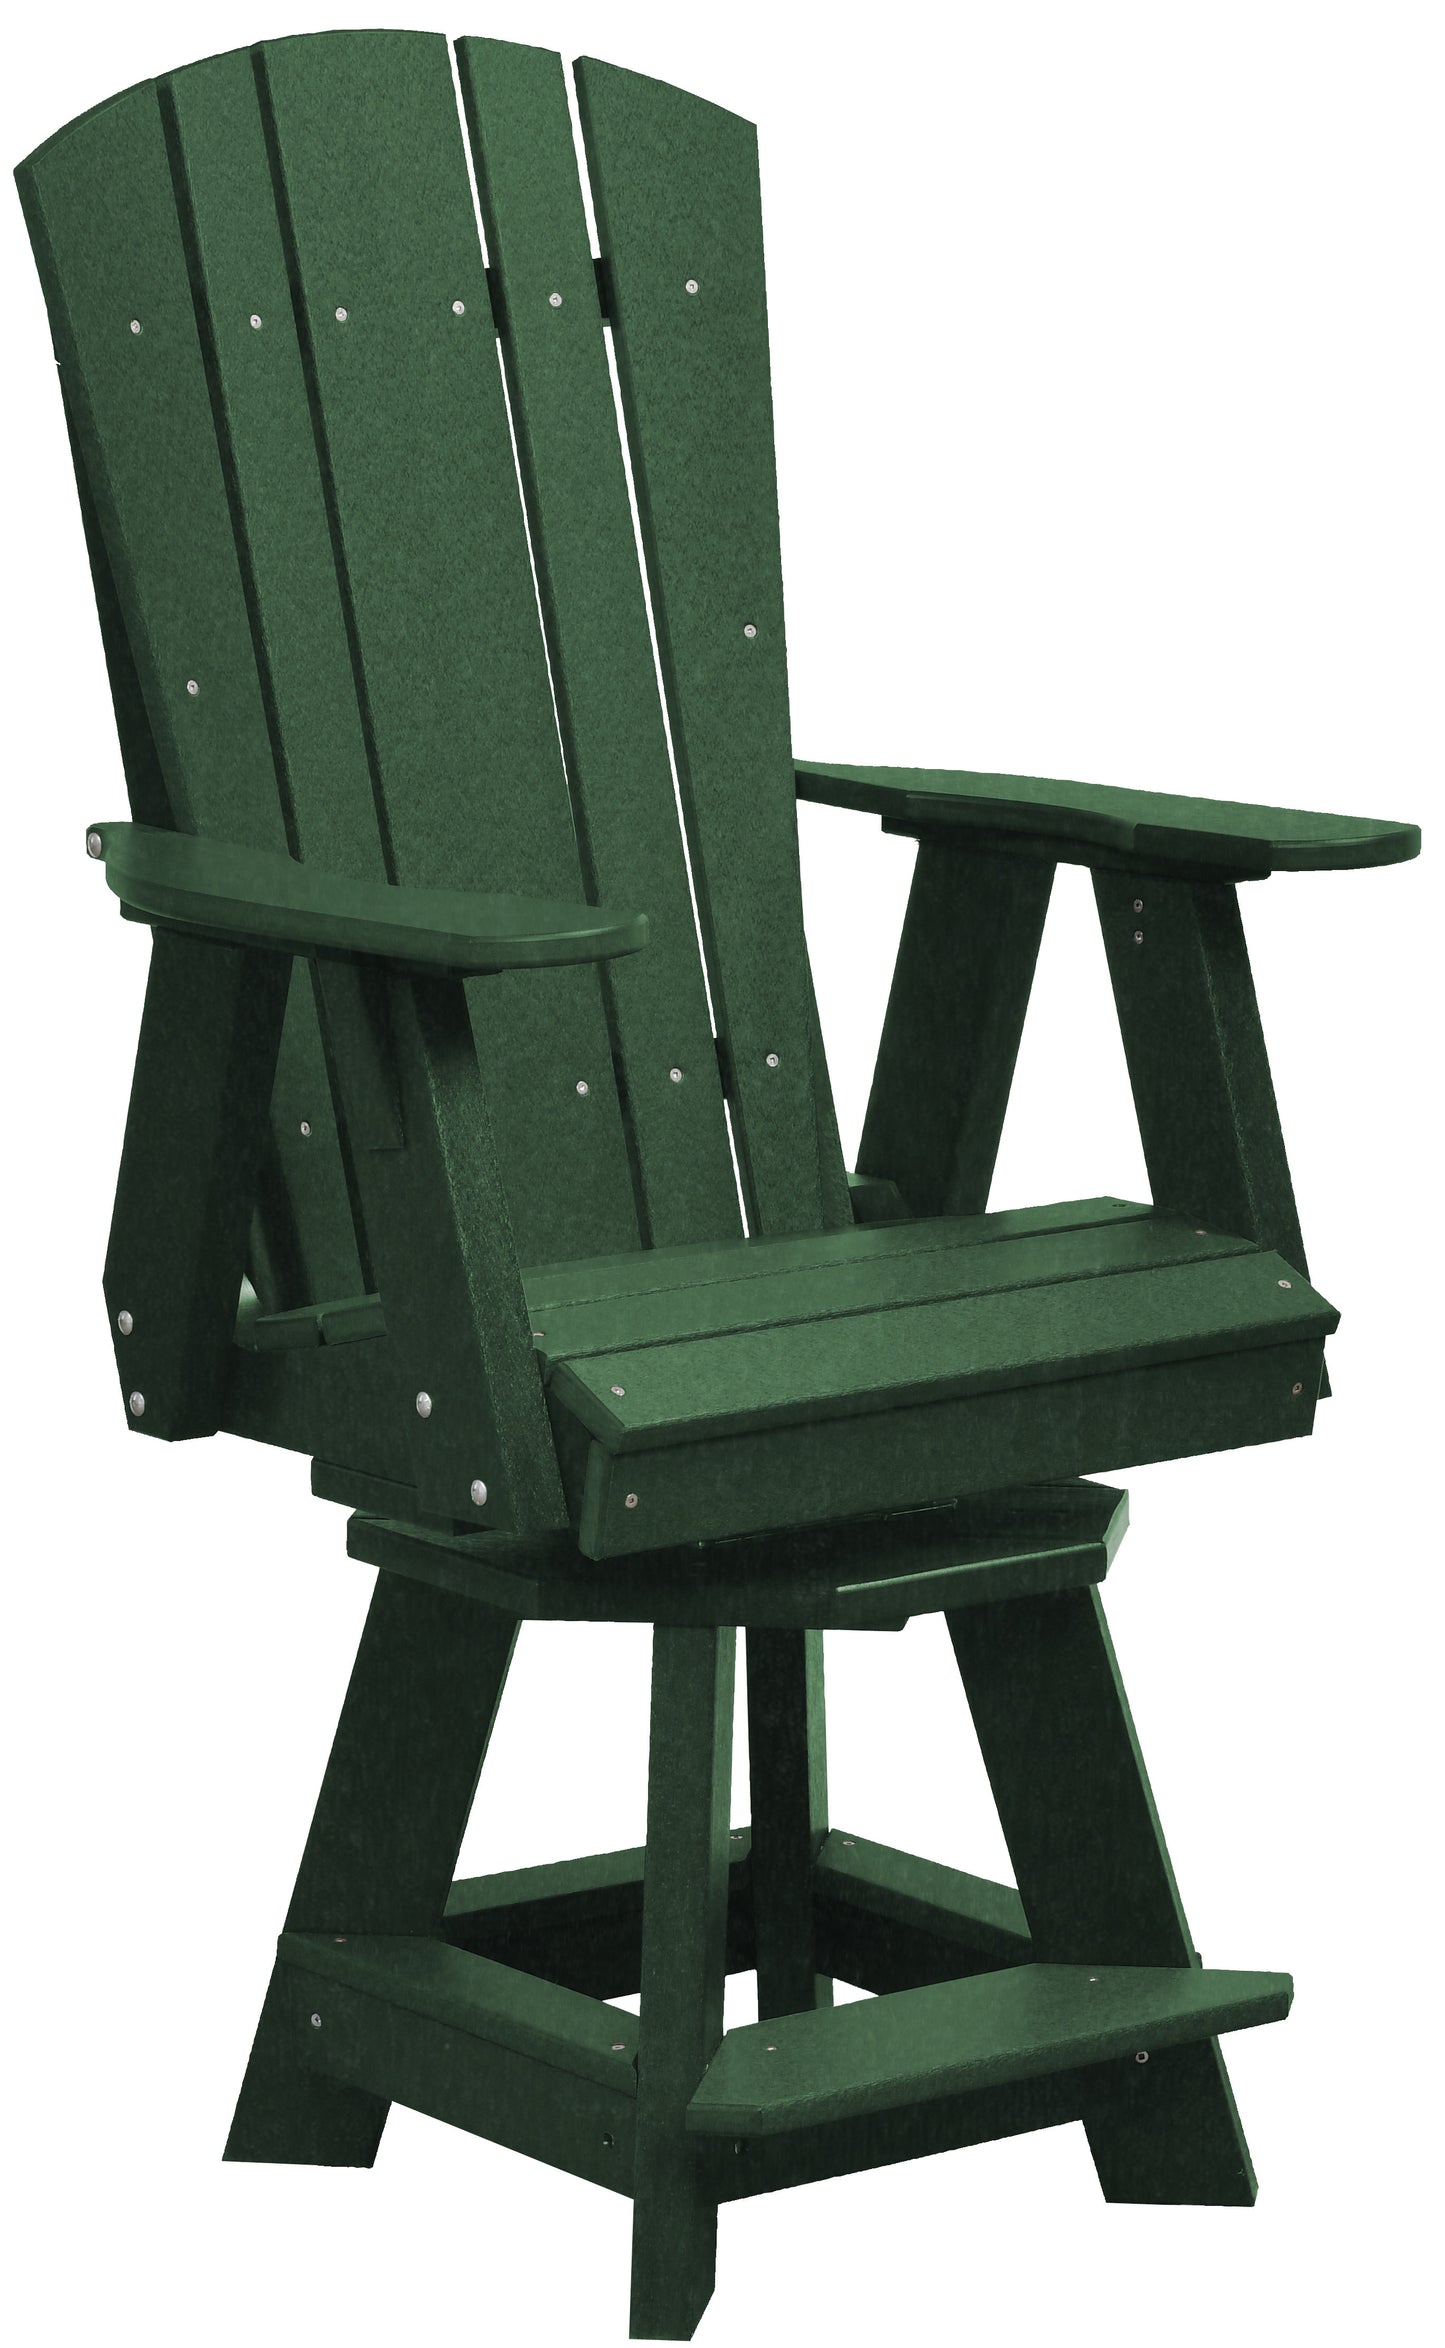 Wildridge Recycled Plastic Heritage Balcony Swivel Chair (Counter Height) - LEAD TIME TO SHIP 6 WEEKS OR LESS